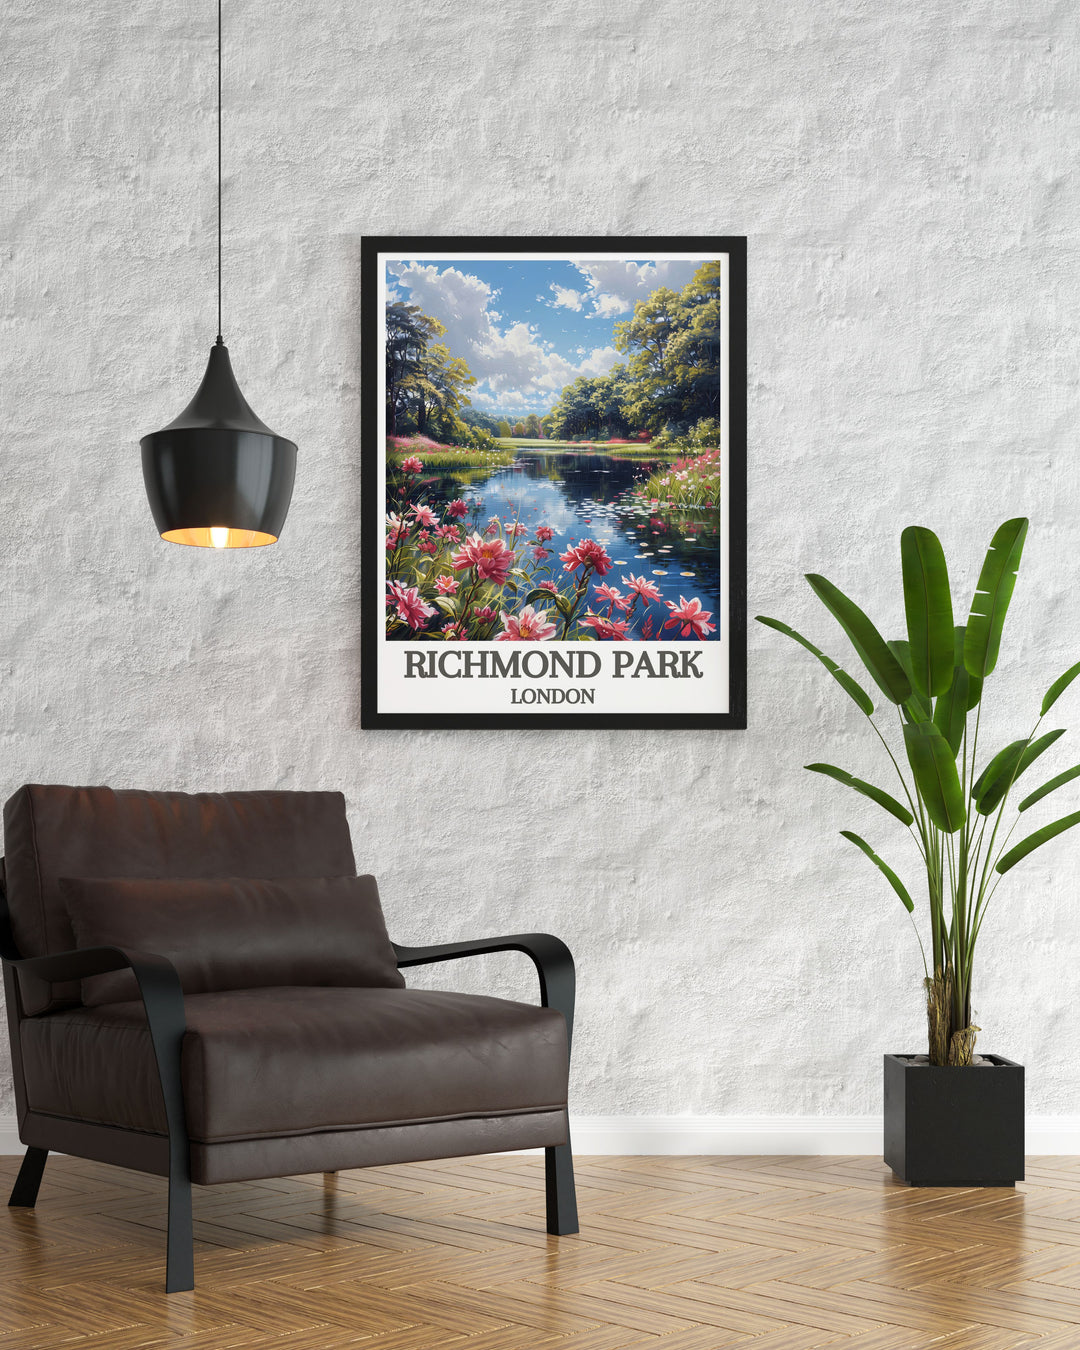 Prints of Isabella Plantation capturing the tranquil beauty and vibrant flowers of this enchanting location in Richmond Park.